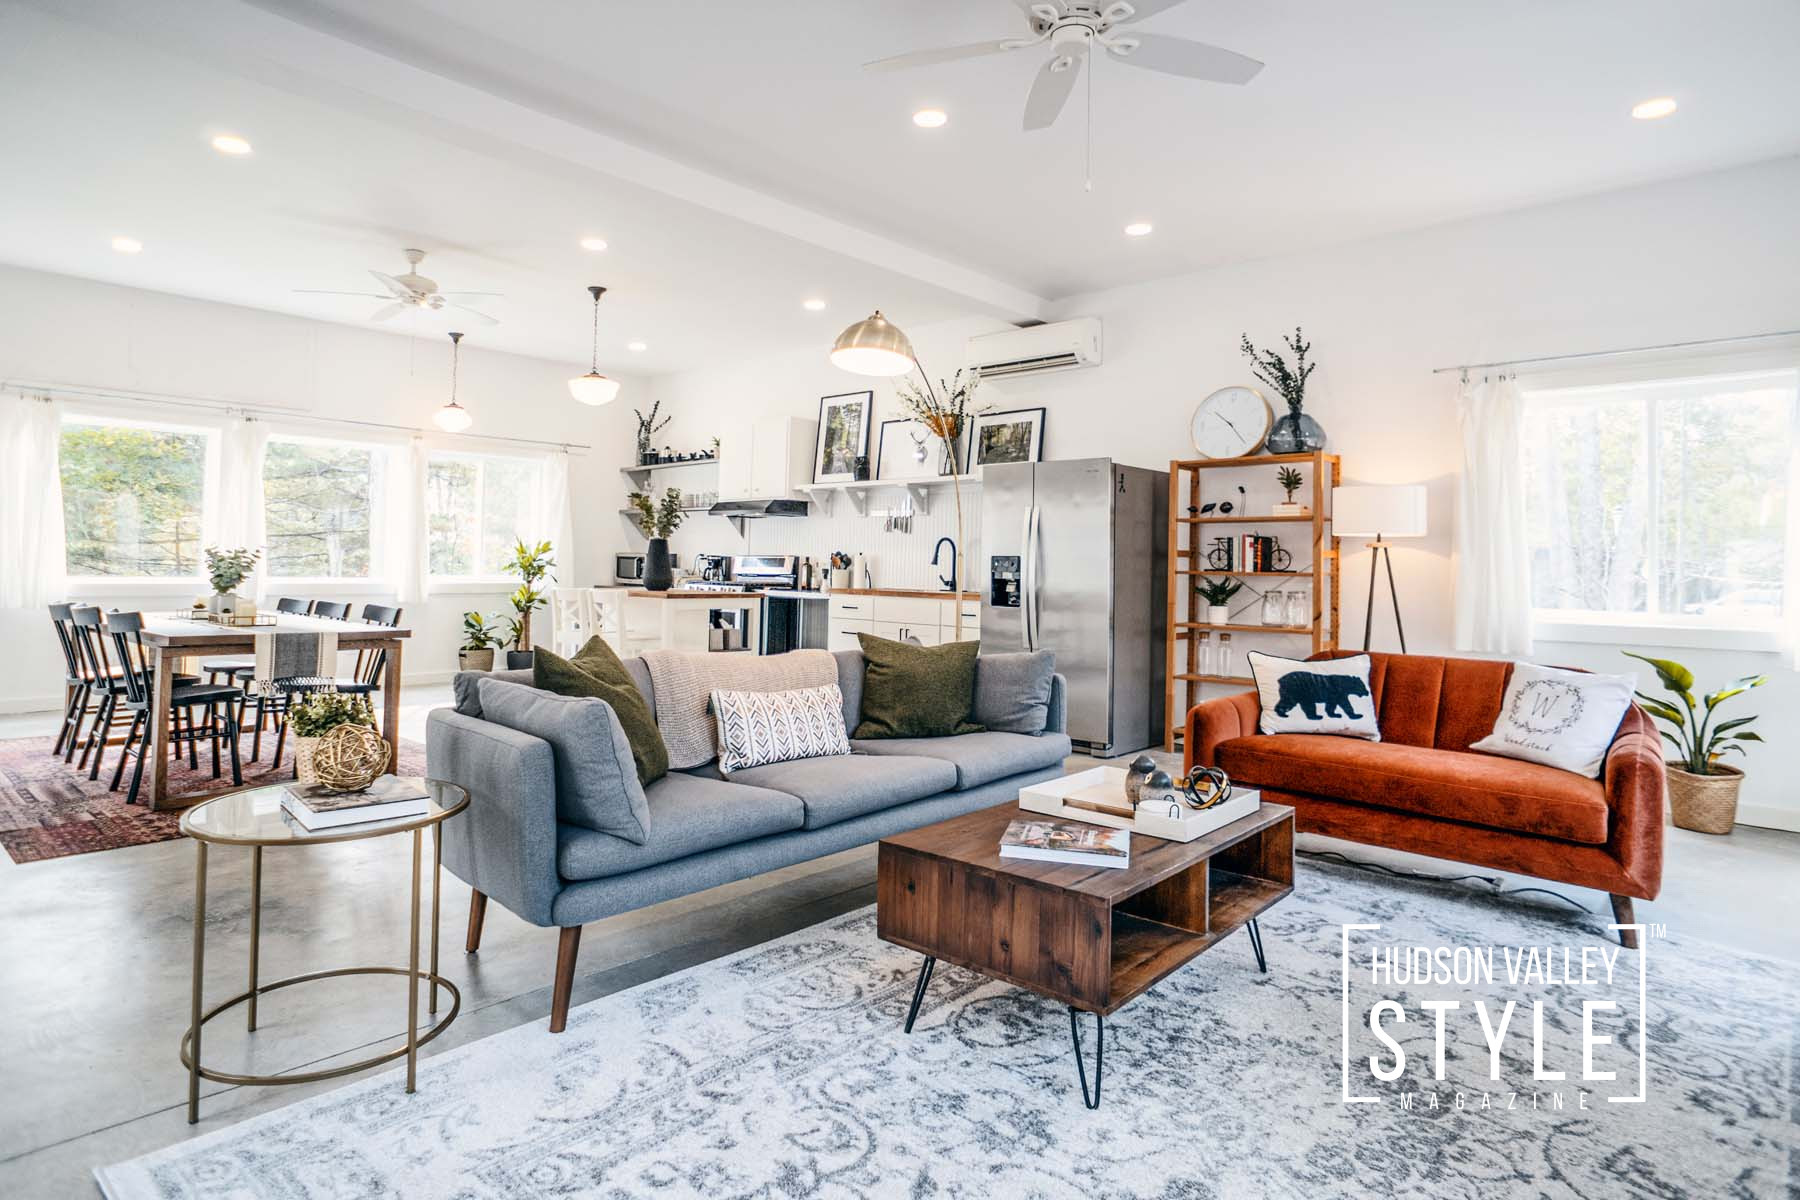 Farmer-style home staging tips – Hudson Valley real estate by realtor Xiomara Marrero – Photographed by Duncan Avenue Studios + Alluvion Media